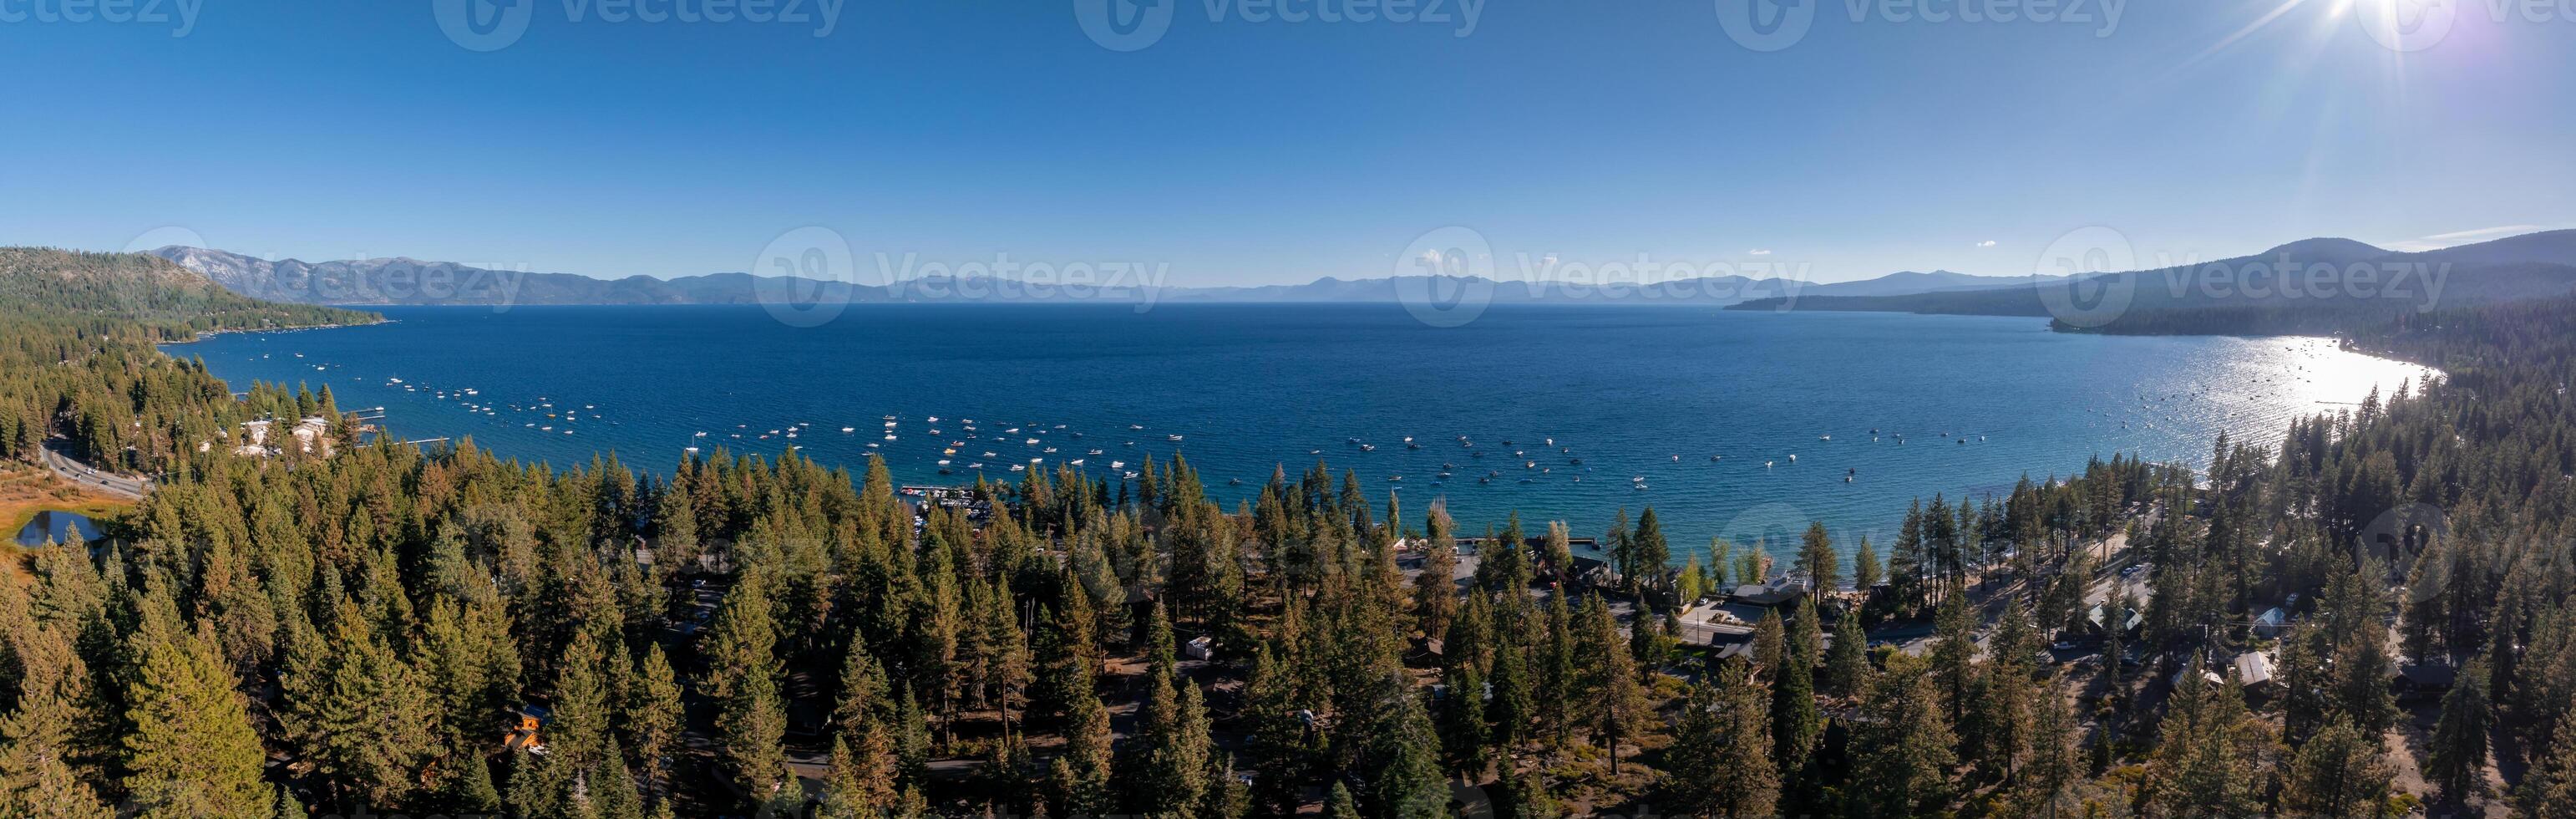 Beautiful aerial view of the Tahoe lake from above in California, USA. photo